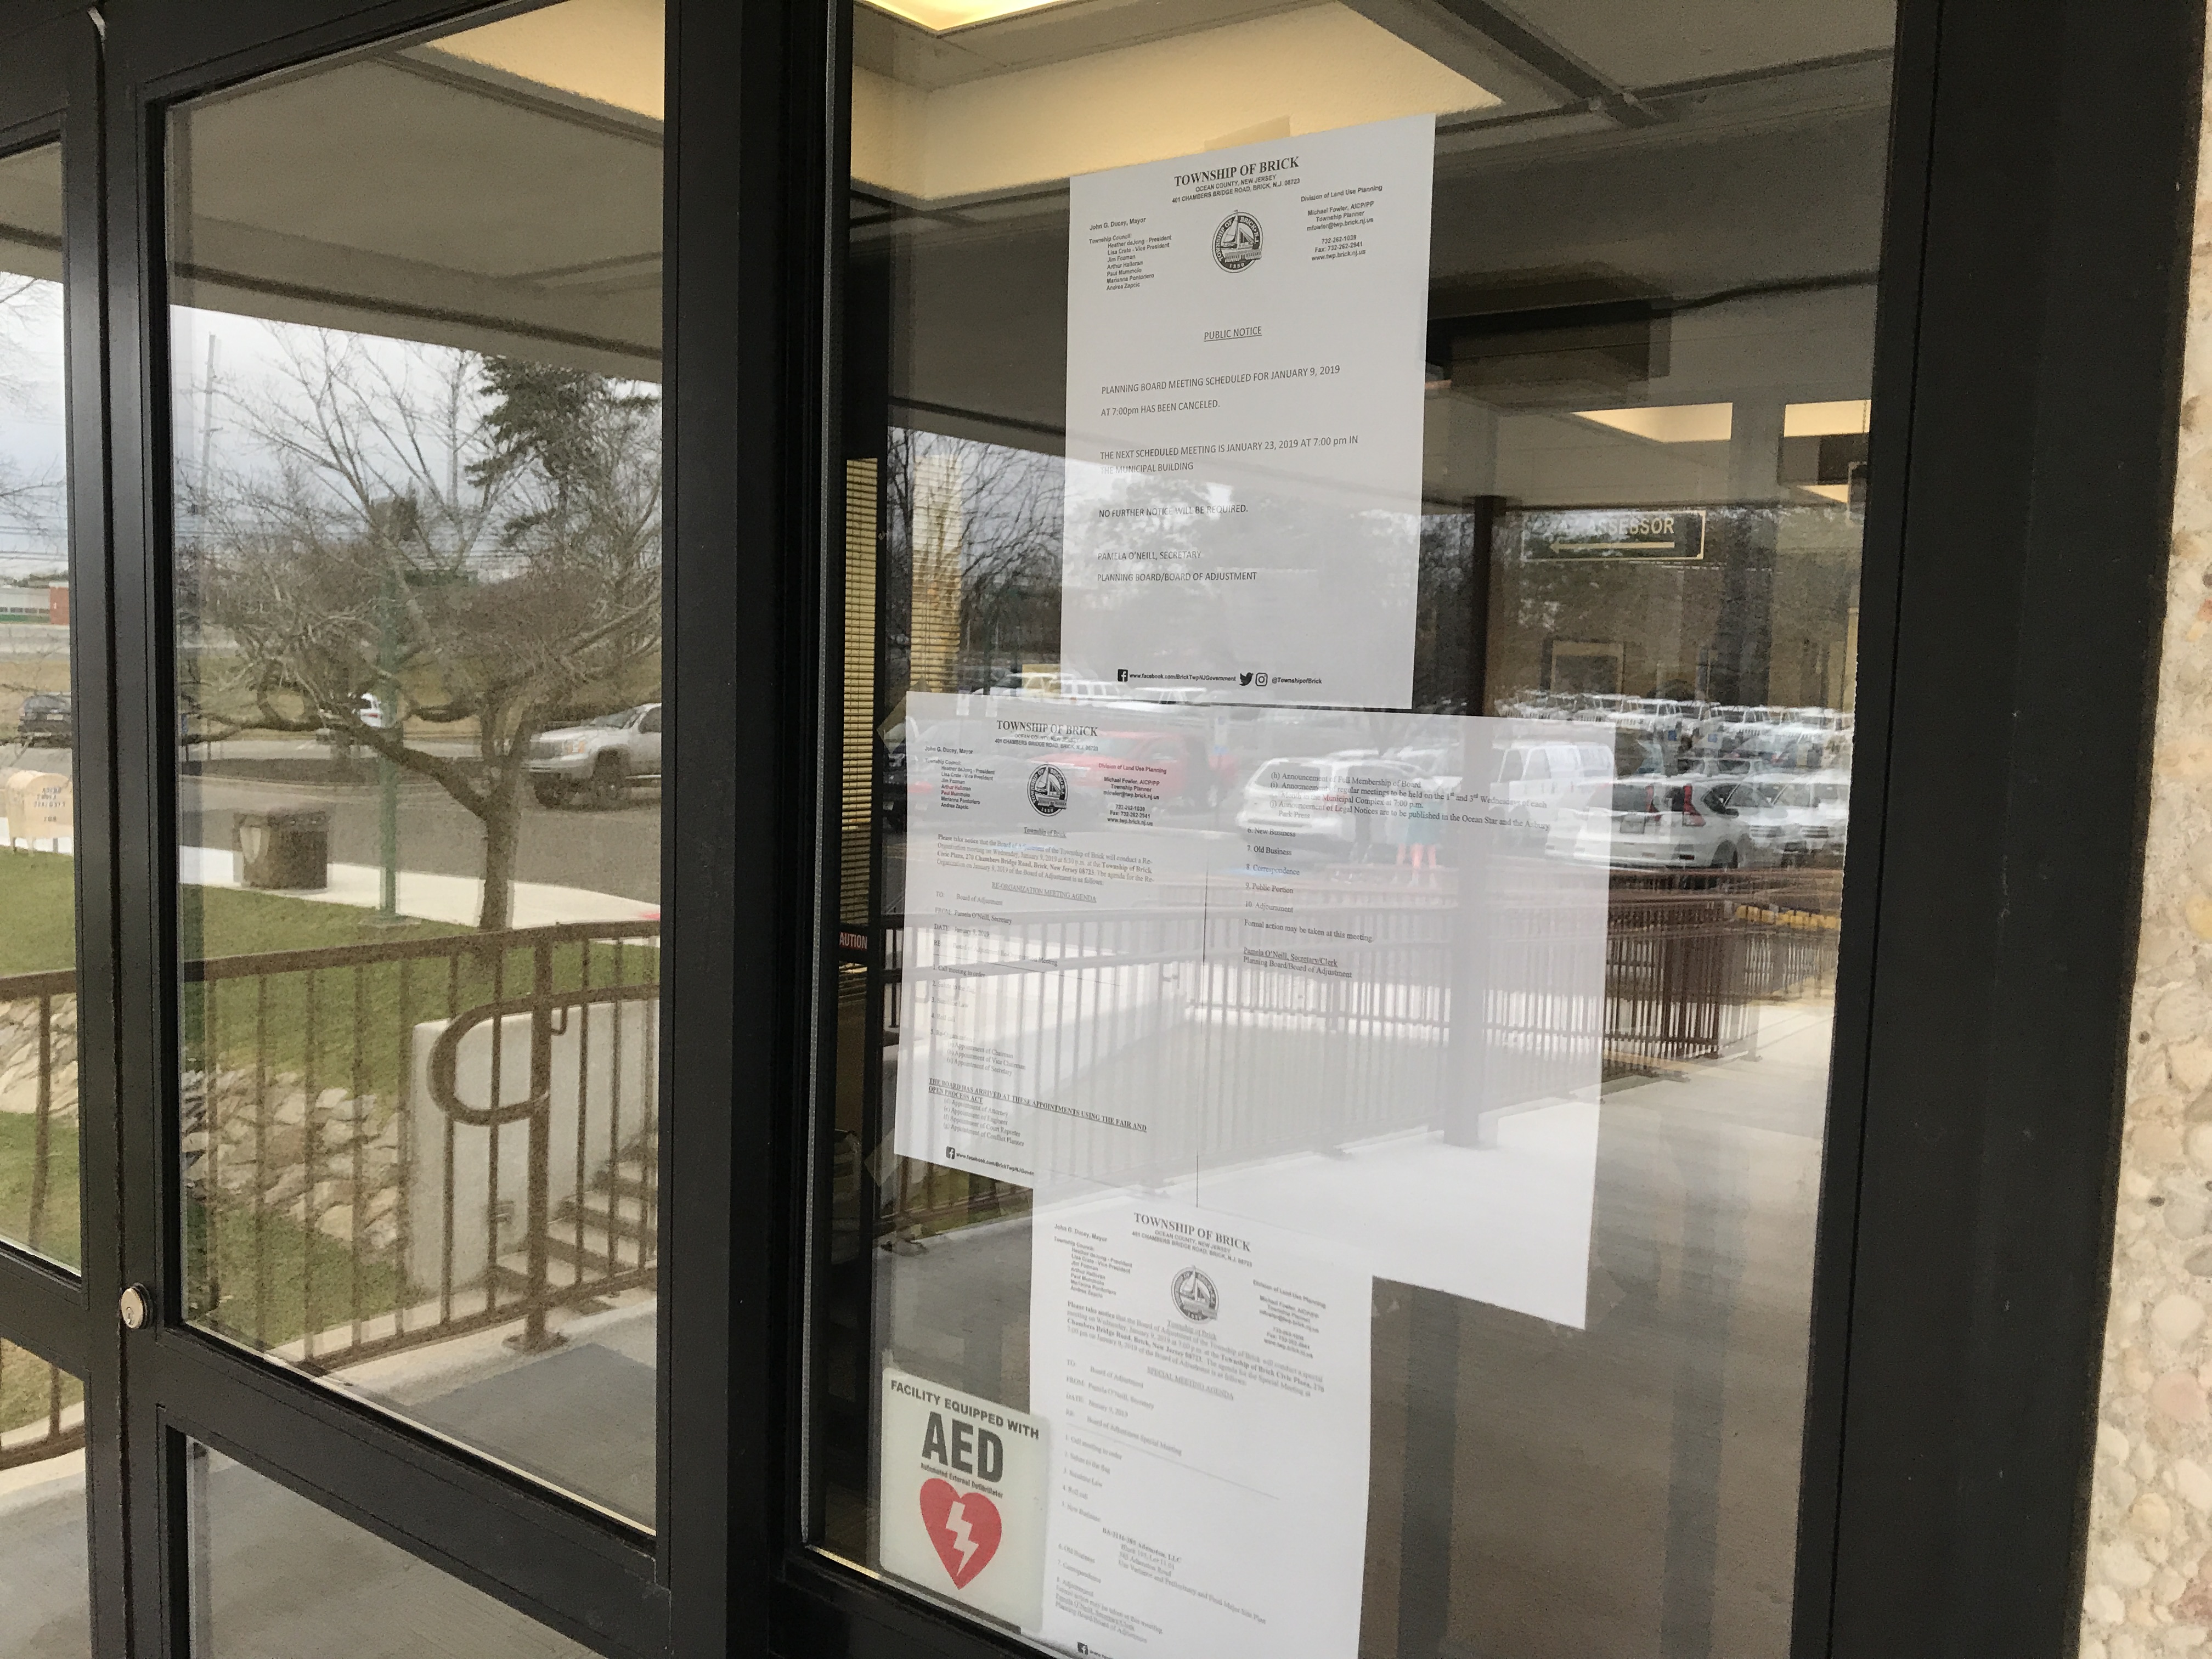 Notices of meeting cancellation taped to the front door of town hall in Brick, Jan. 7, 2019. (Photo: Daniel Nee)